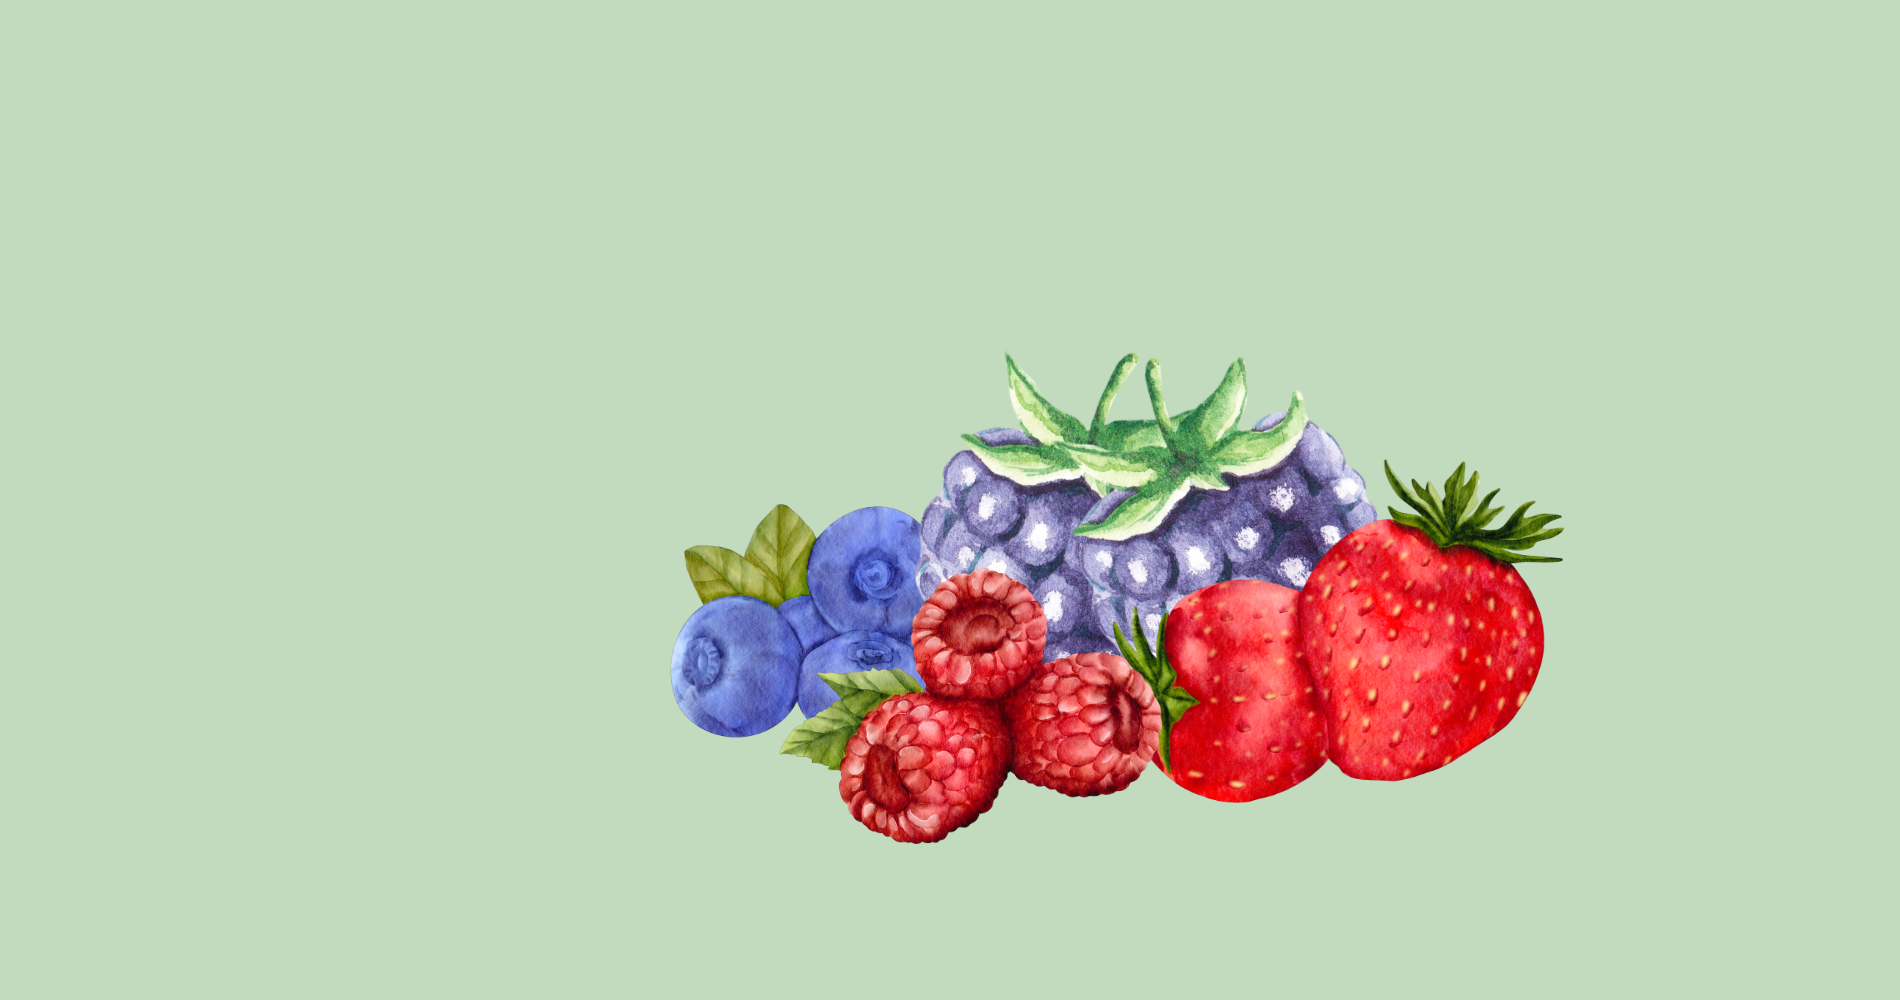 How to Store Strawberries, Blueberries, and Blackberries so They Stay  Fresher Longer